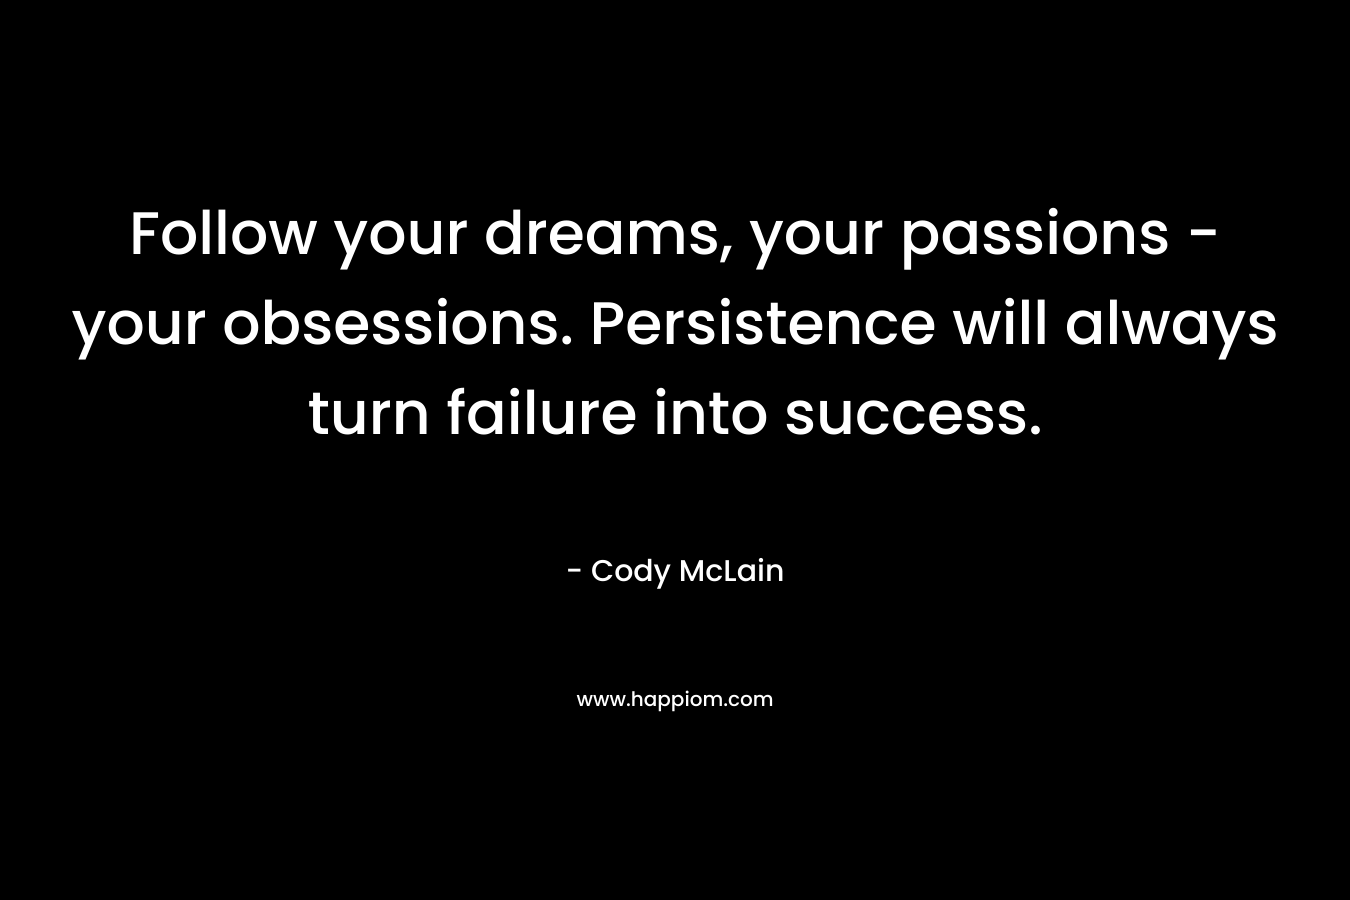 Follow your dreams, your passions - your obsessions. Persistence will always turn failure into success.